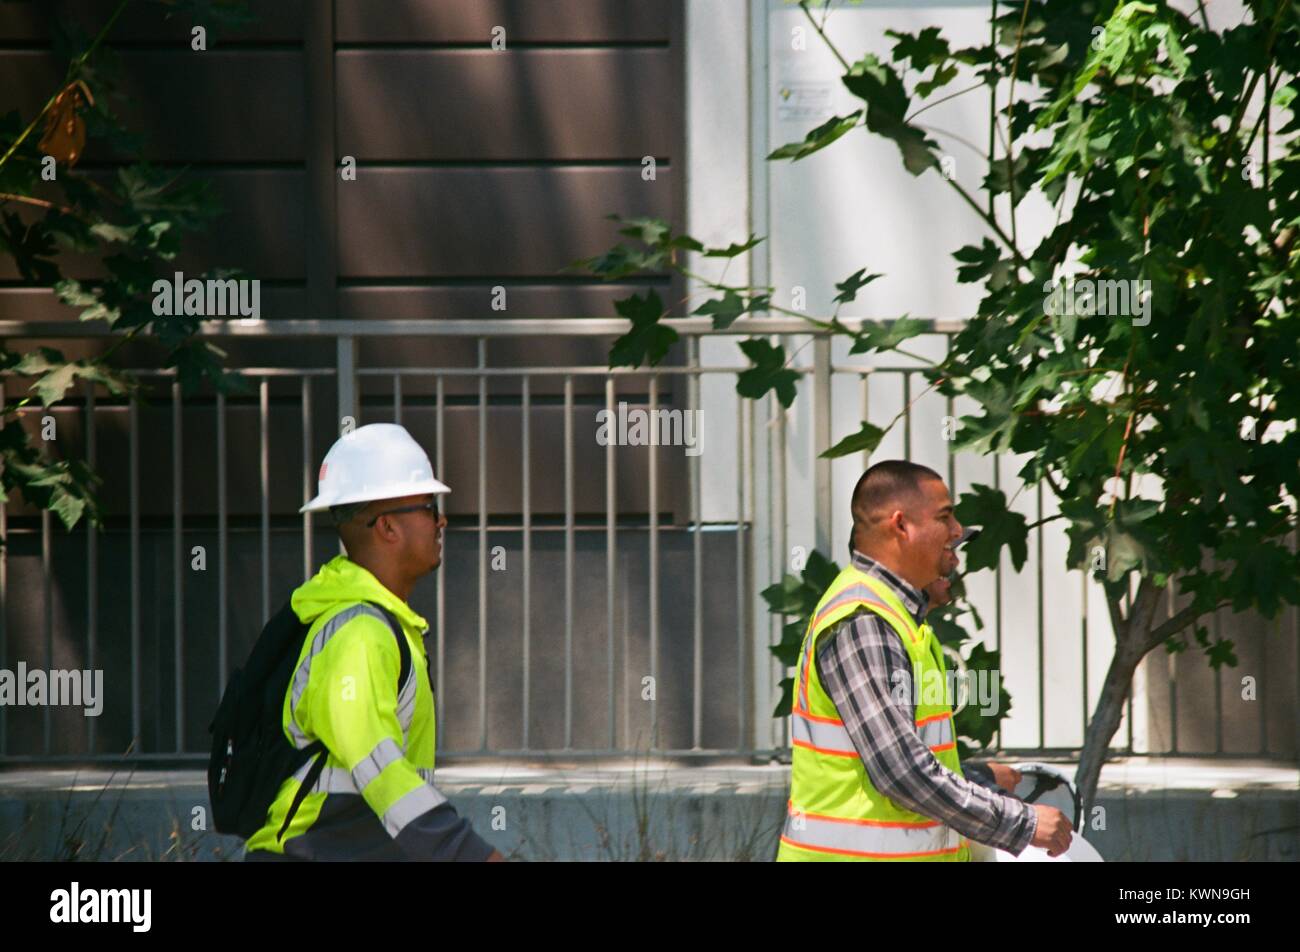 Construction workers with hard hats and high visibility vests walk near the construction zone at the Apple Park, known colloquially as 'The Spaceship', the new headquarters of Apple Inc in the Silicon Valley town of Cupertino, California, July 25, 2017. Stock Photo